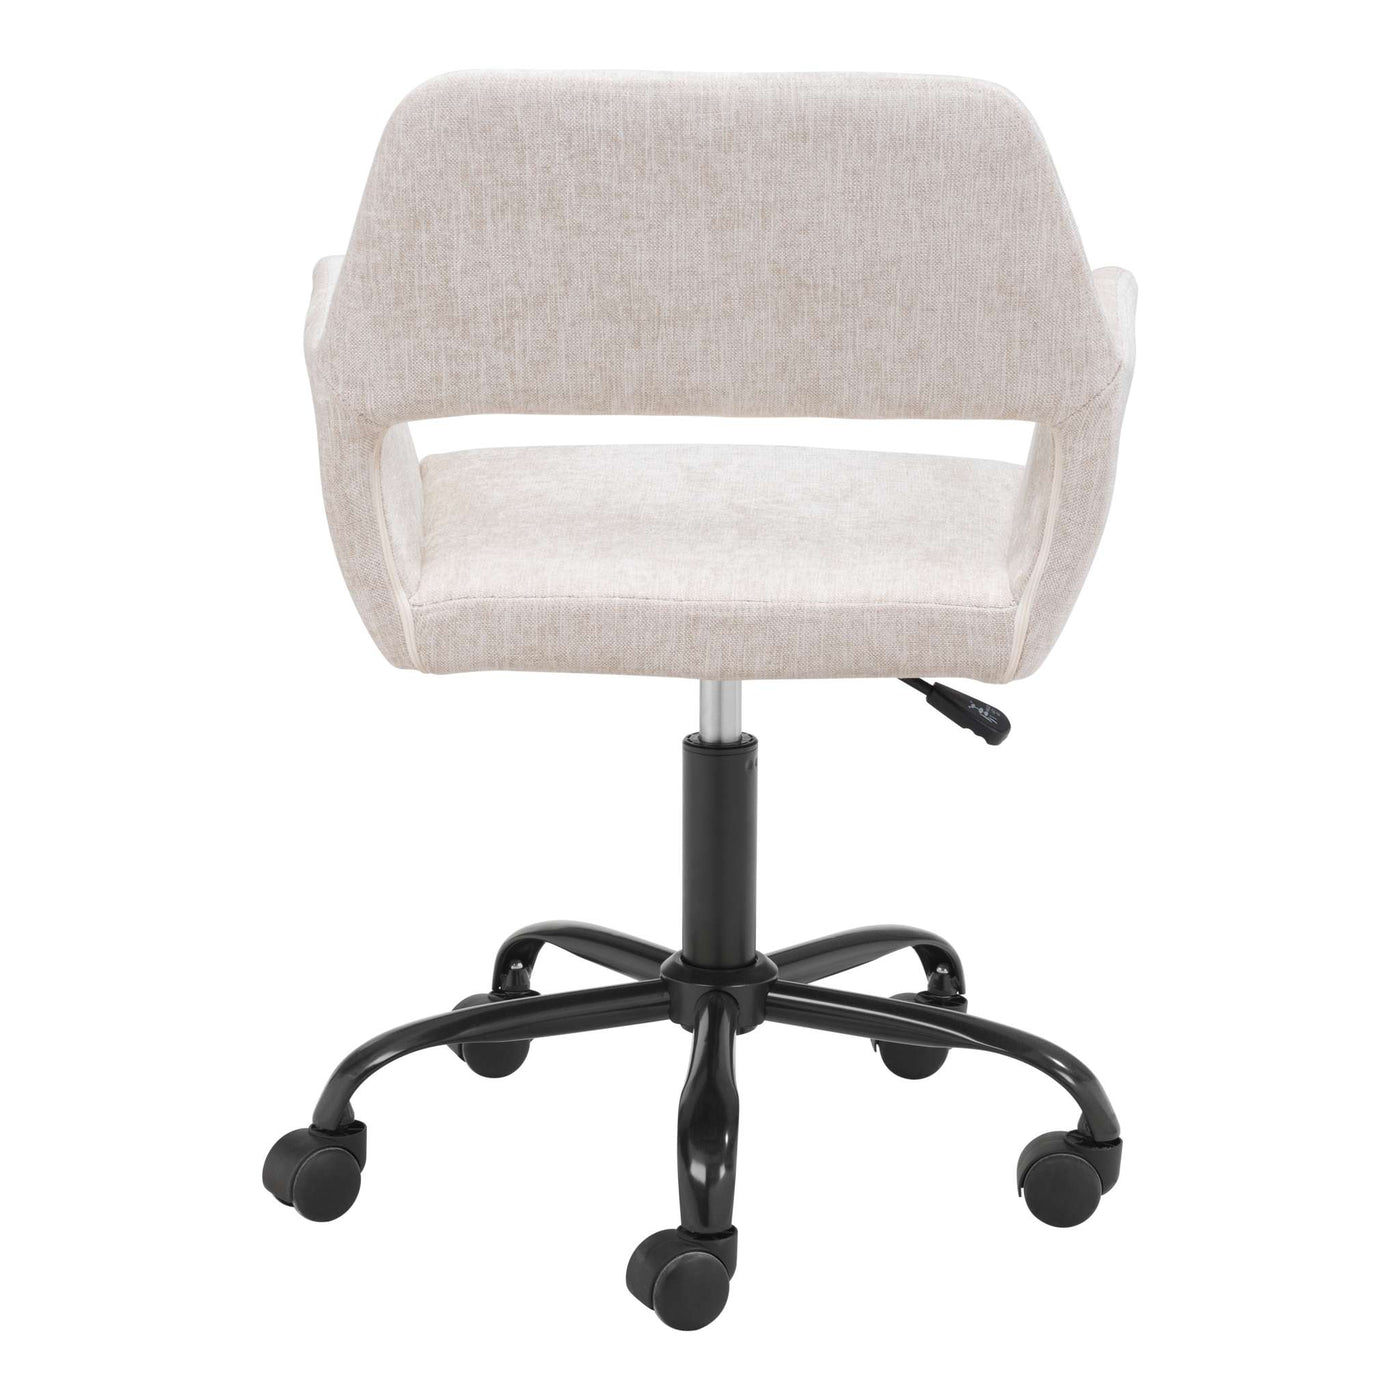 Zuo Mod Athair Office Chair